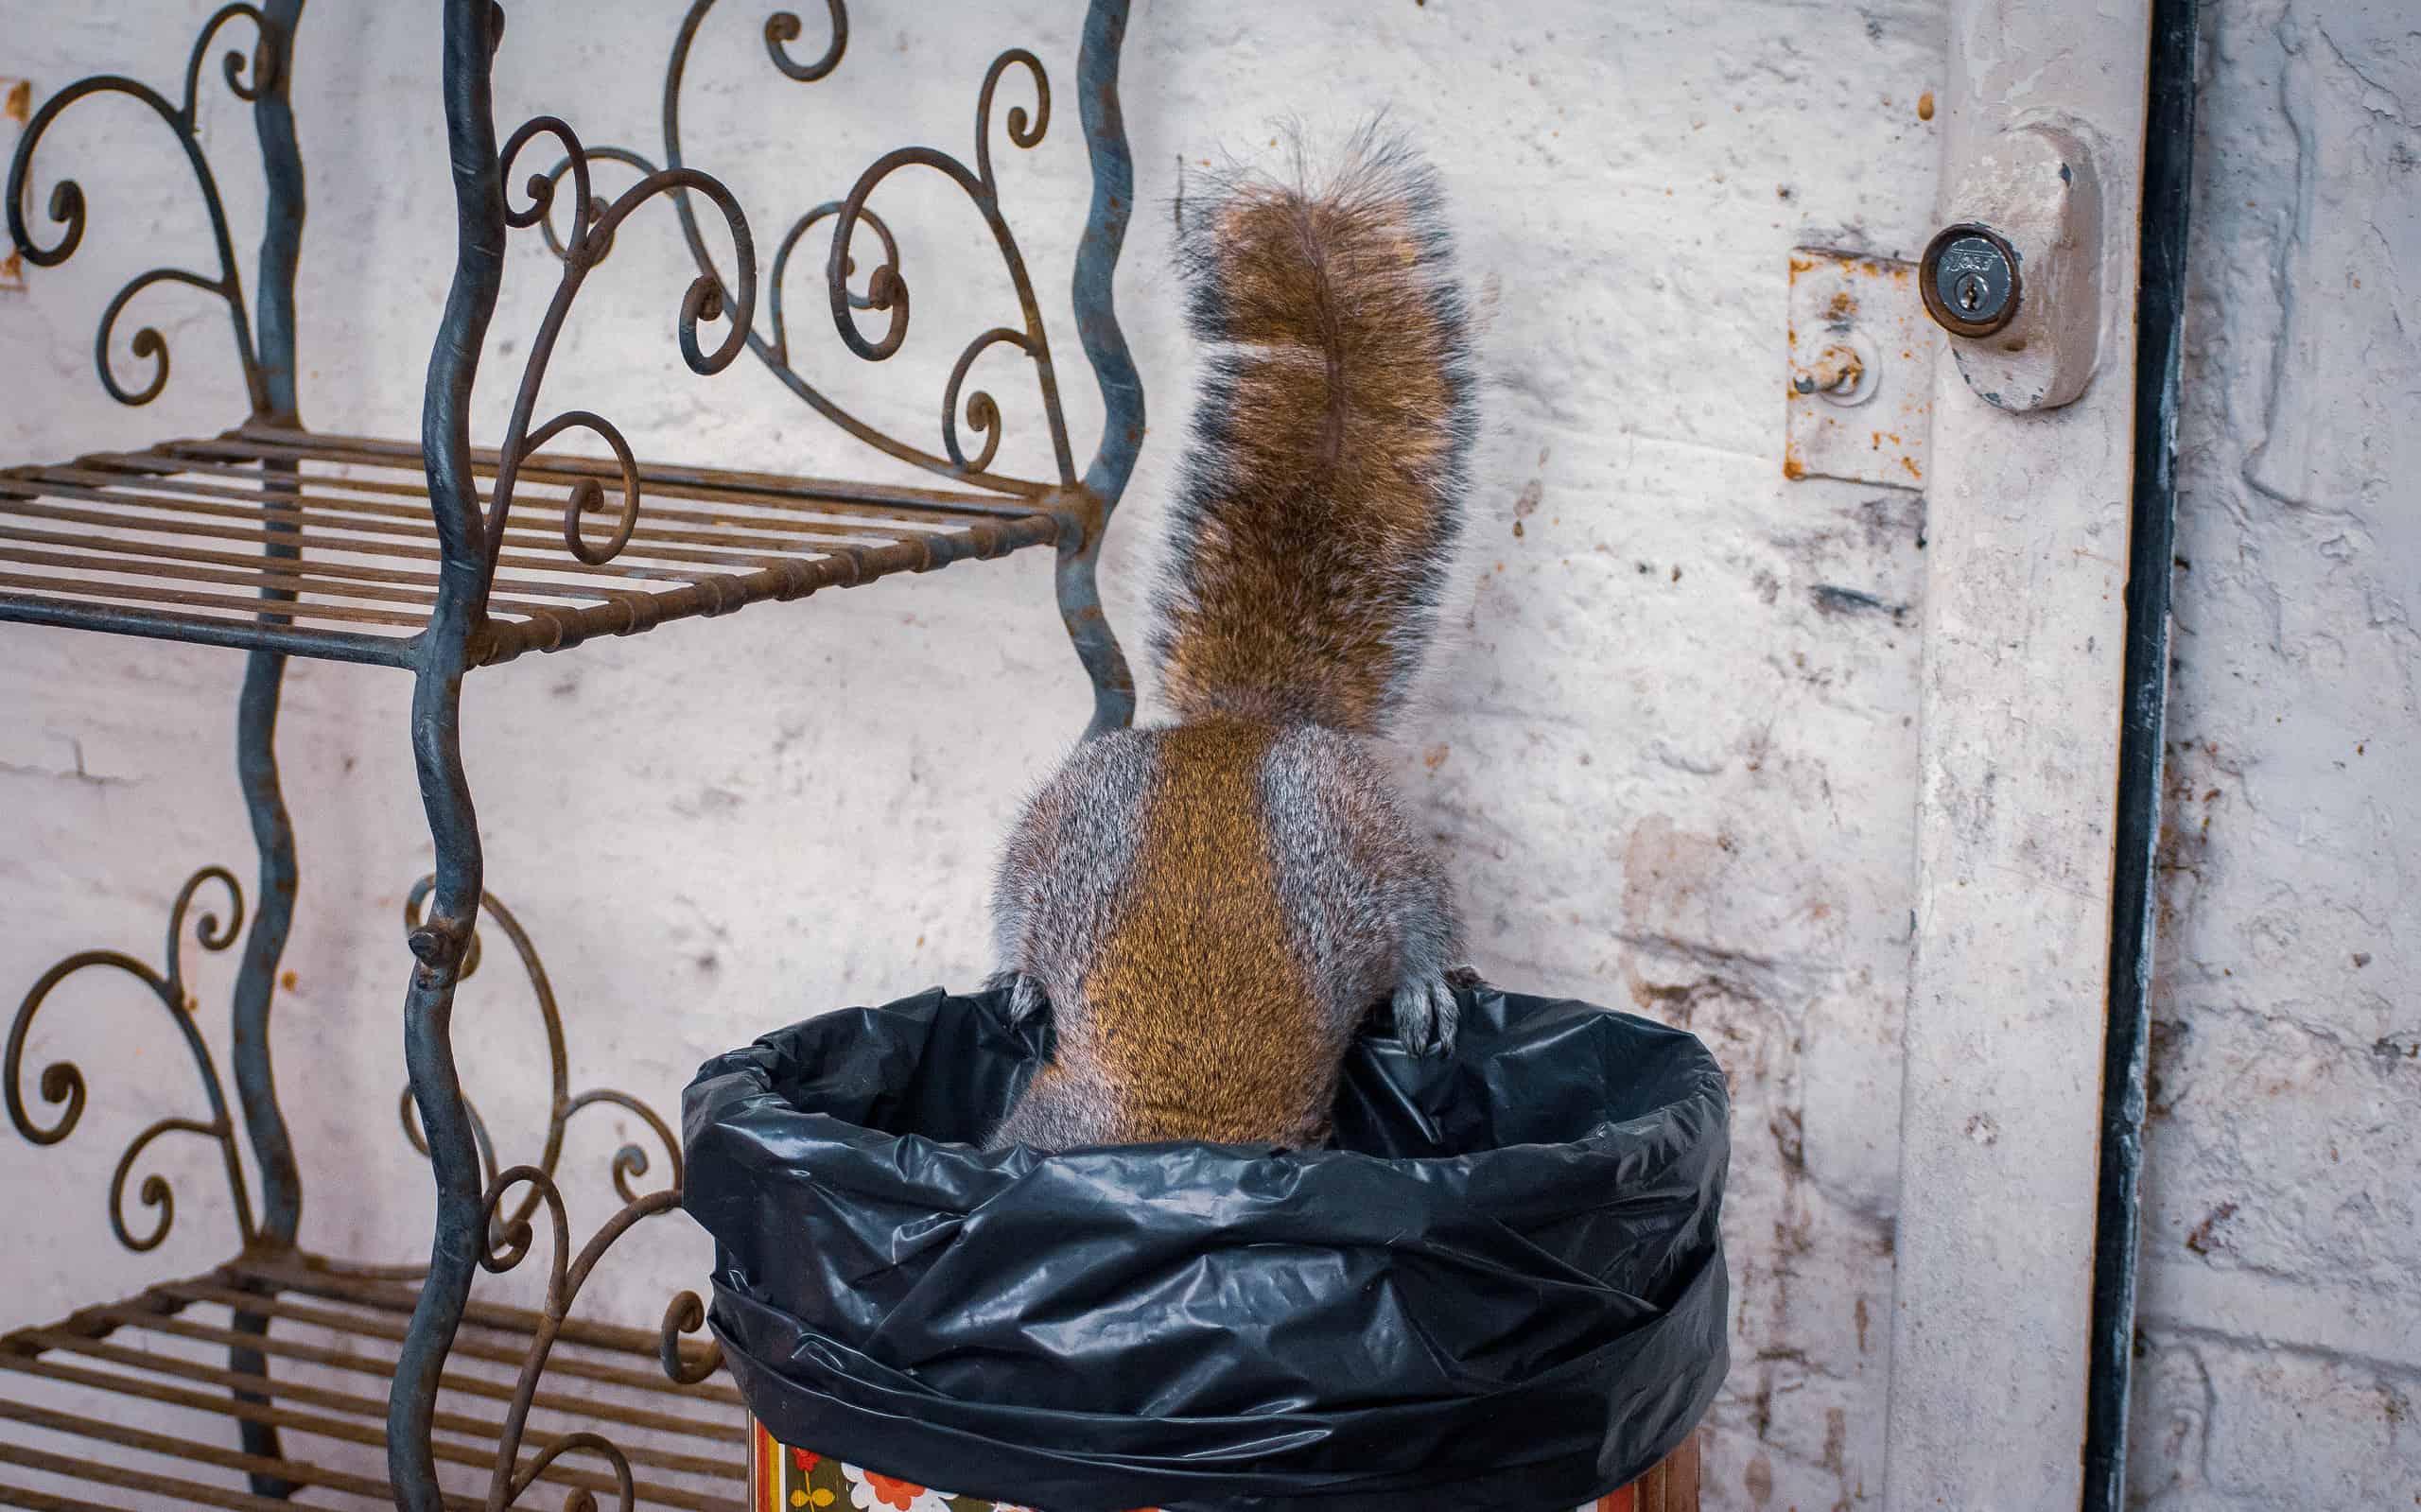 Grey squirrel looking for food in trash can